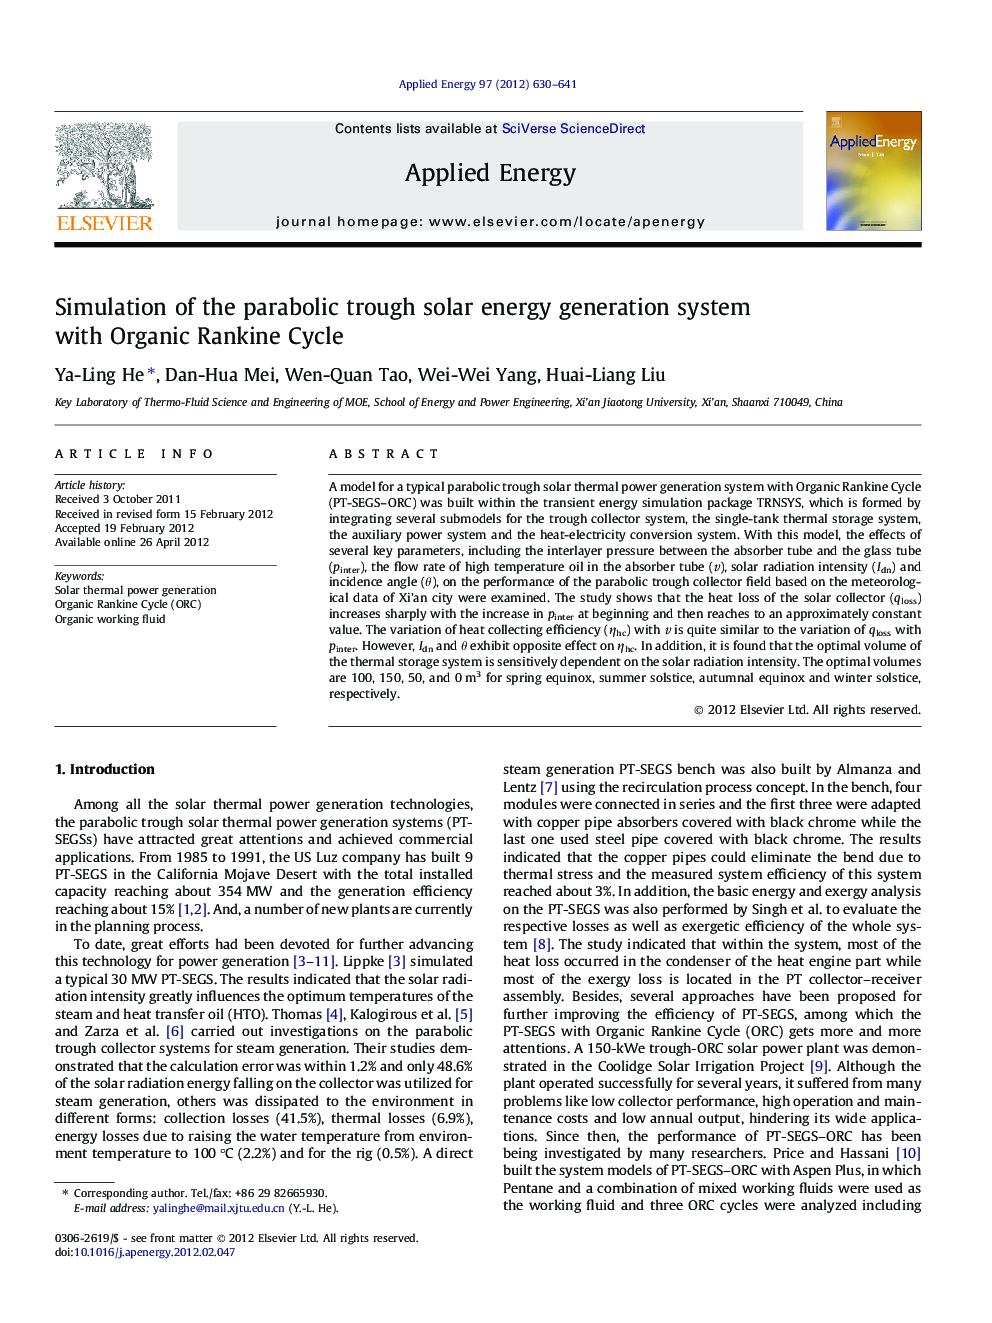 Simulation of the parabolic trough solar energy generation system with Organic Rankine Cycle